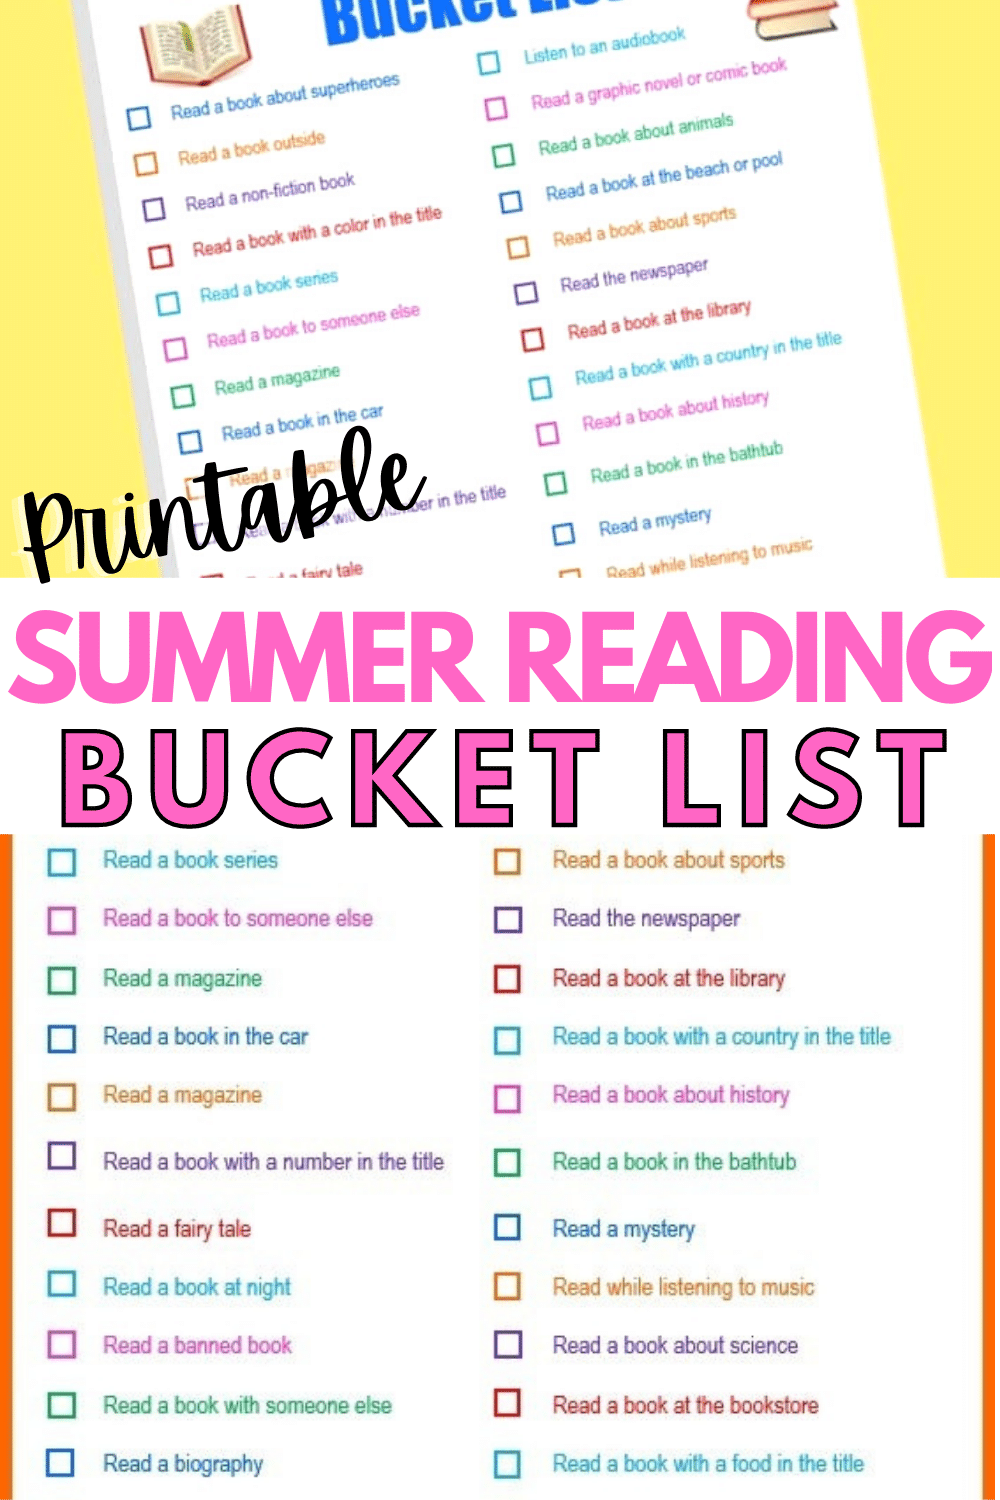 This summer reading bucket list challenges kids to read a variety of books in different ways and places. It's a fun and easy way to keep kids interested in reading over summer break. #summerreading #bucketlist #forkids #kidsactivities via @wondermomwannab